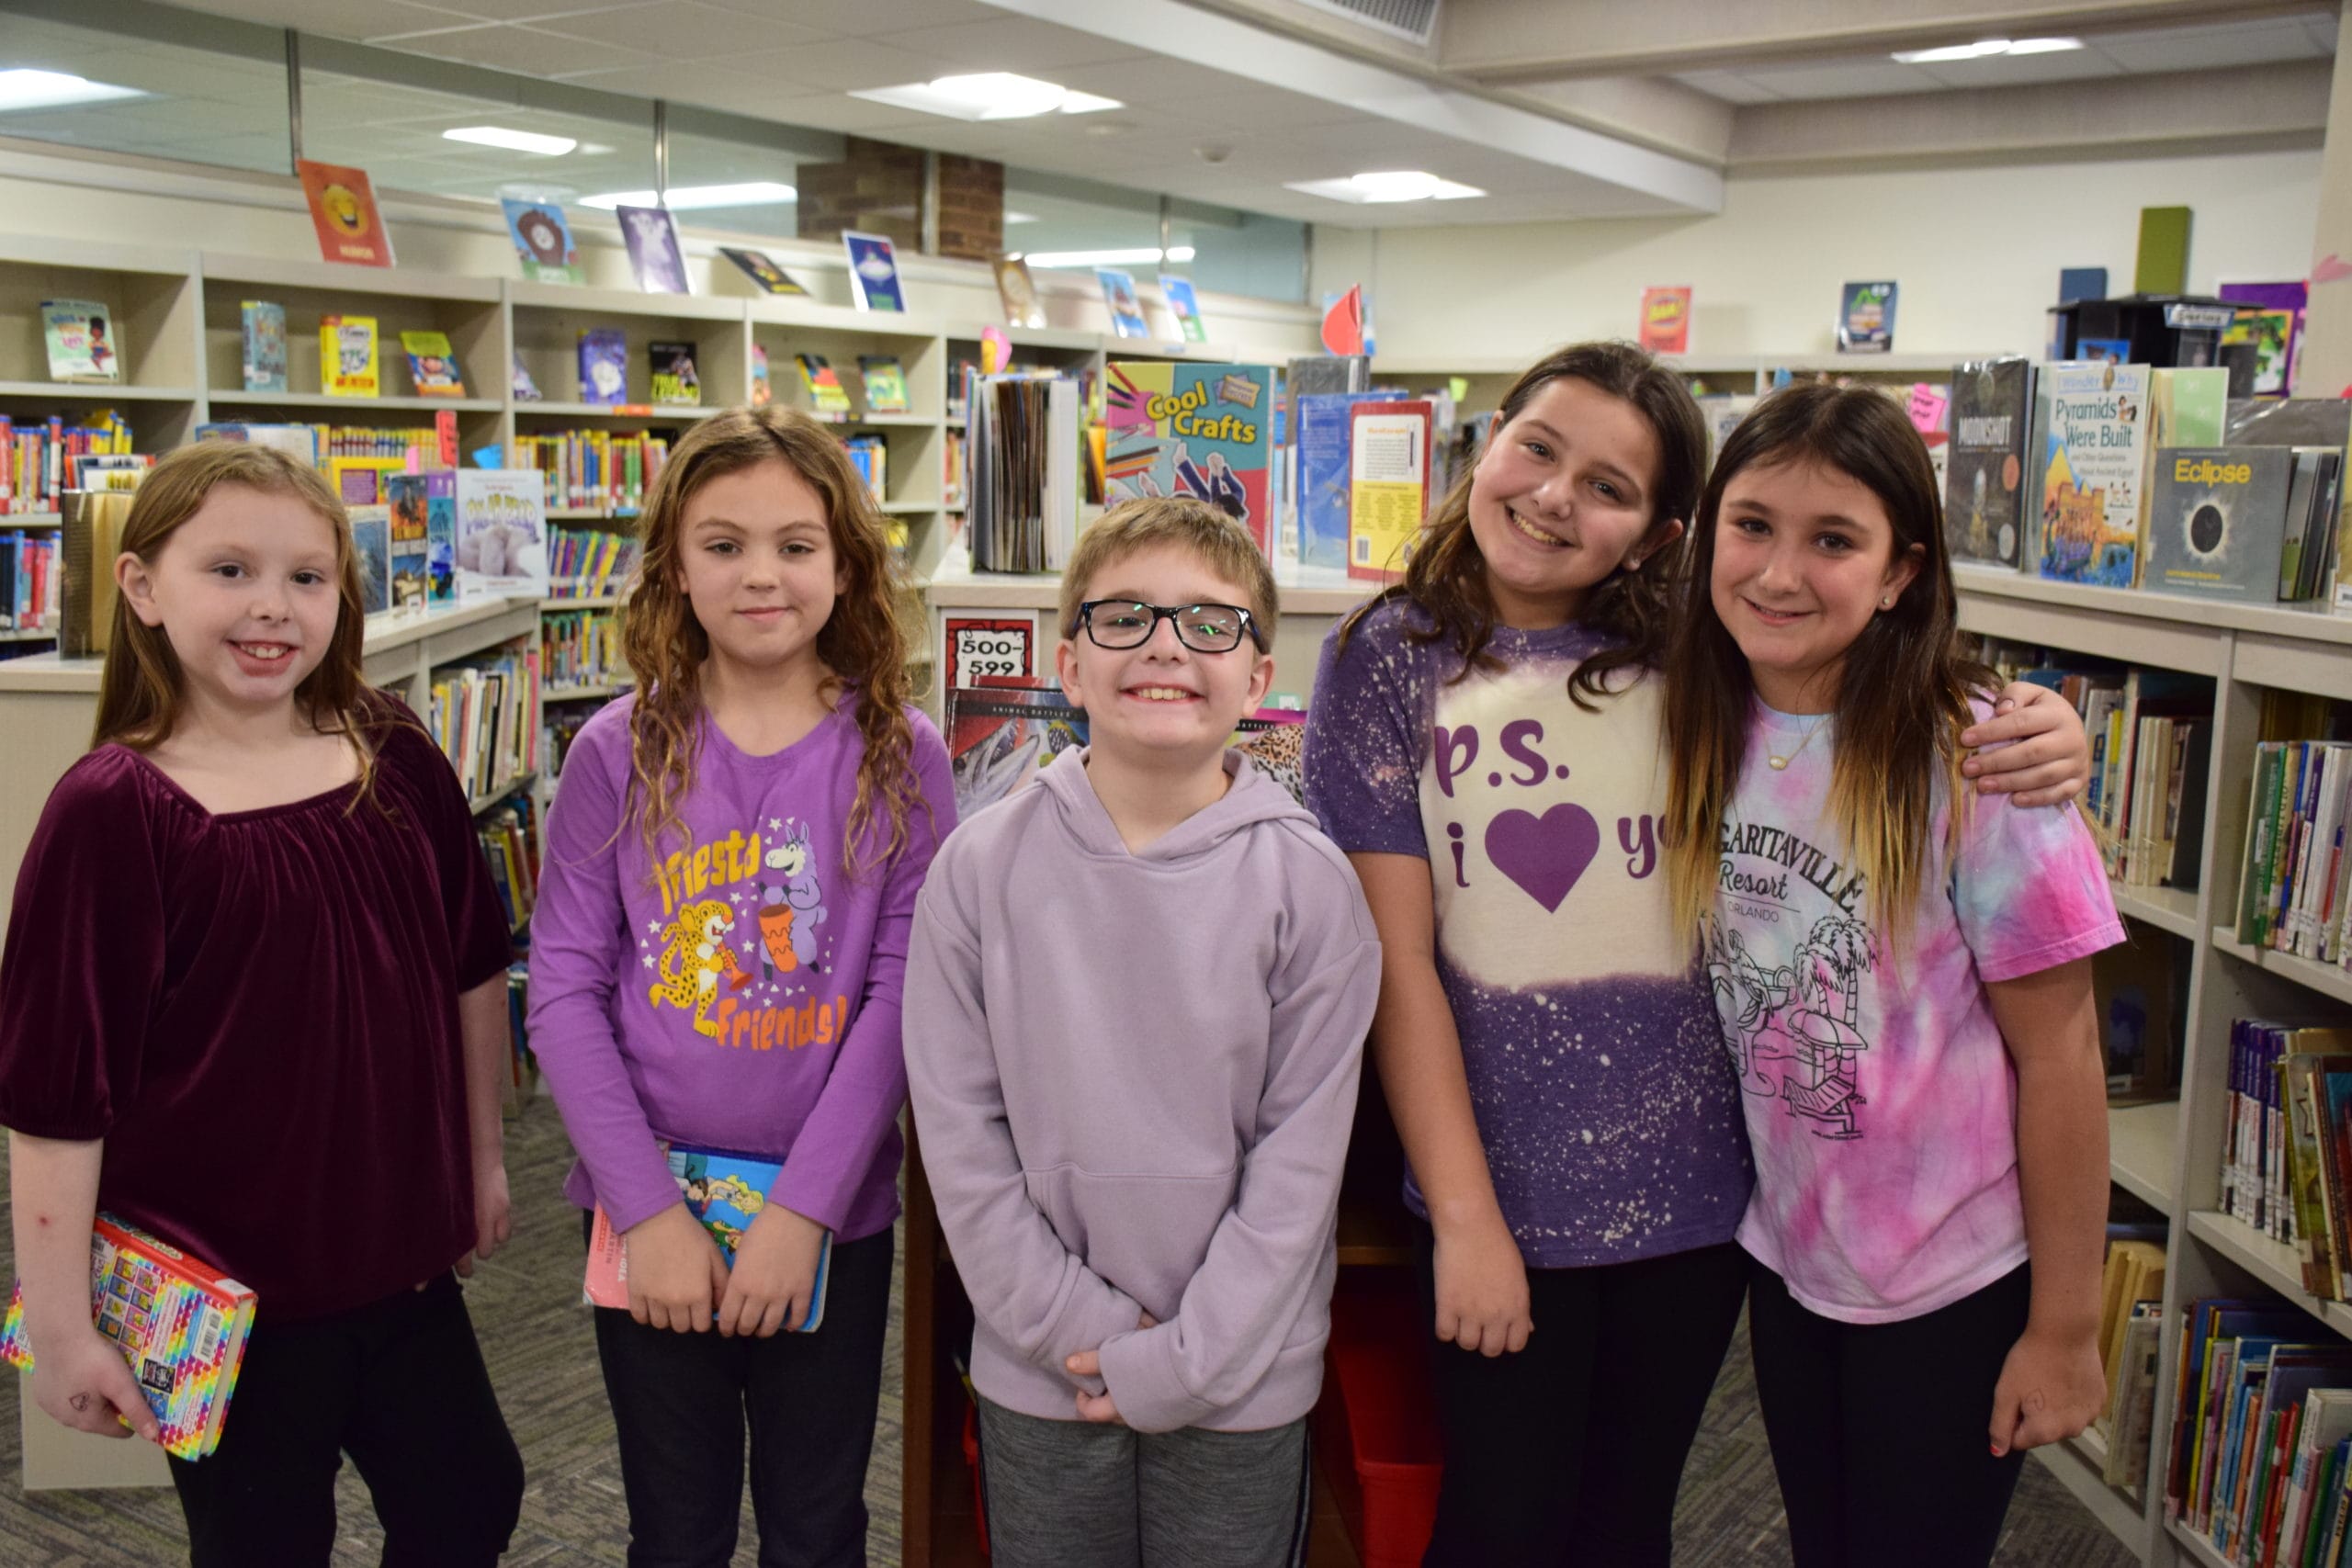 Connetquot Students Spread Love And Kindness